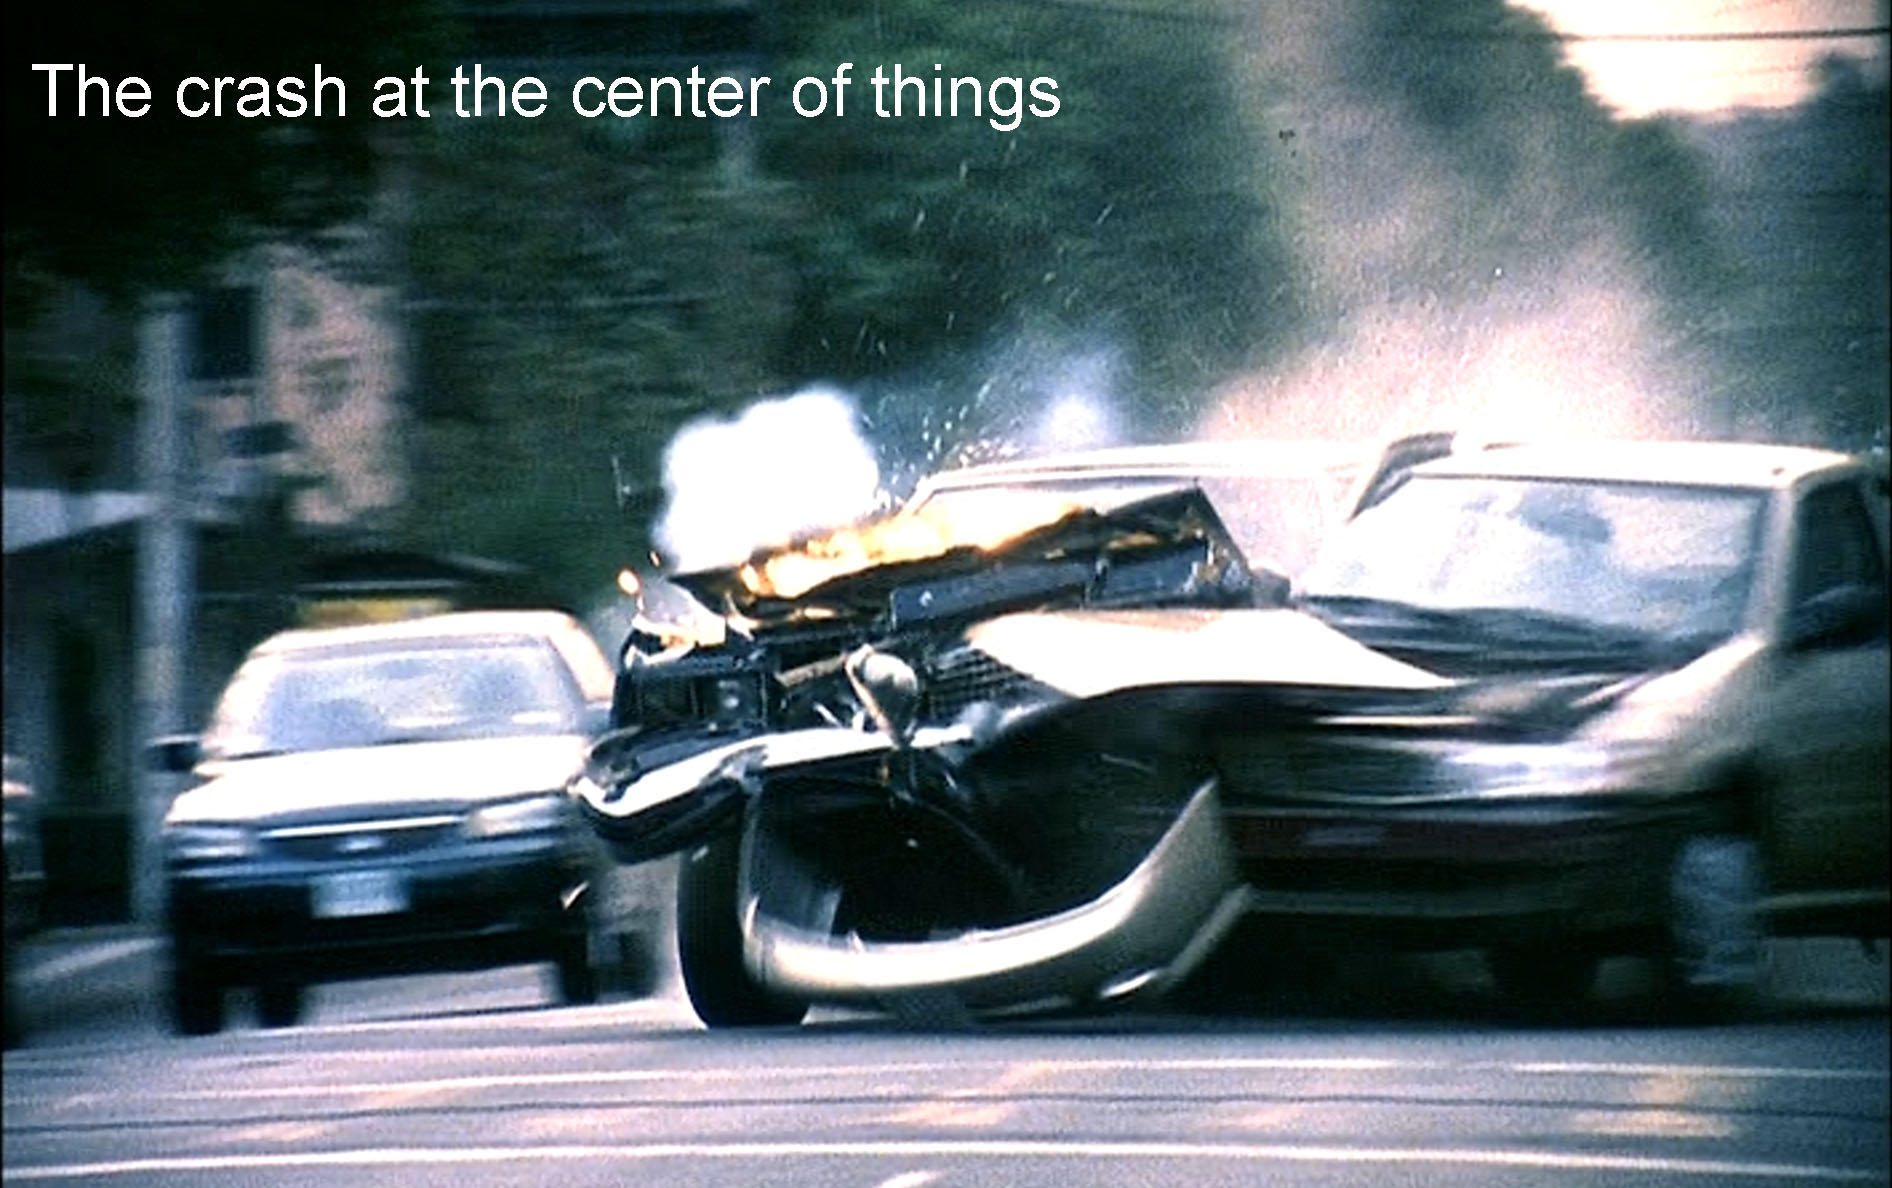 The crash at the center of things